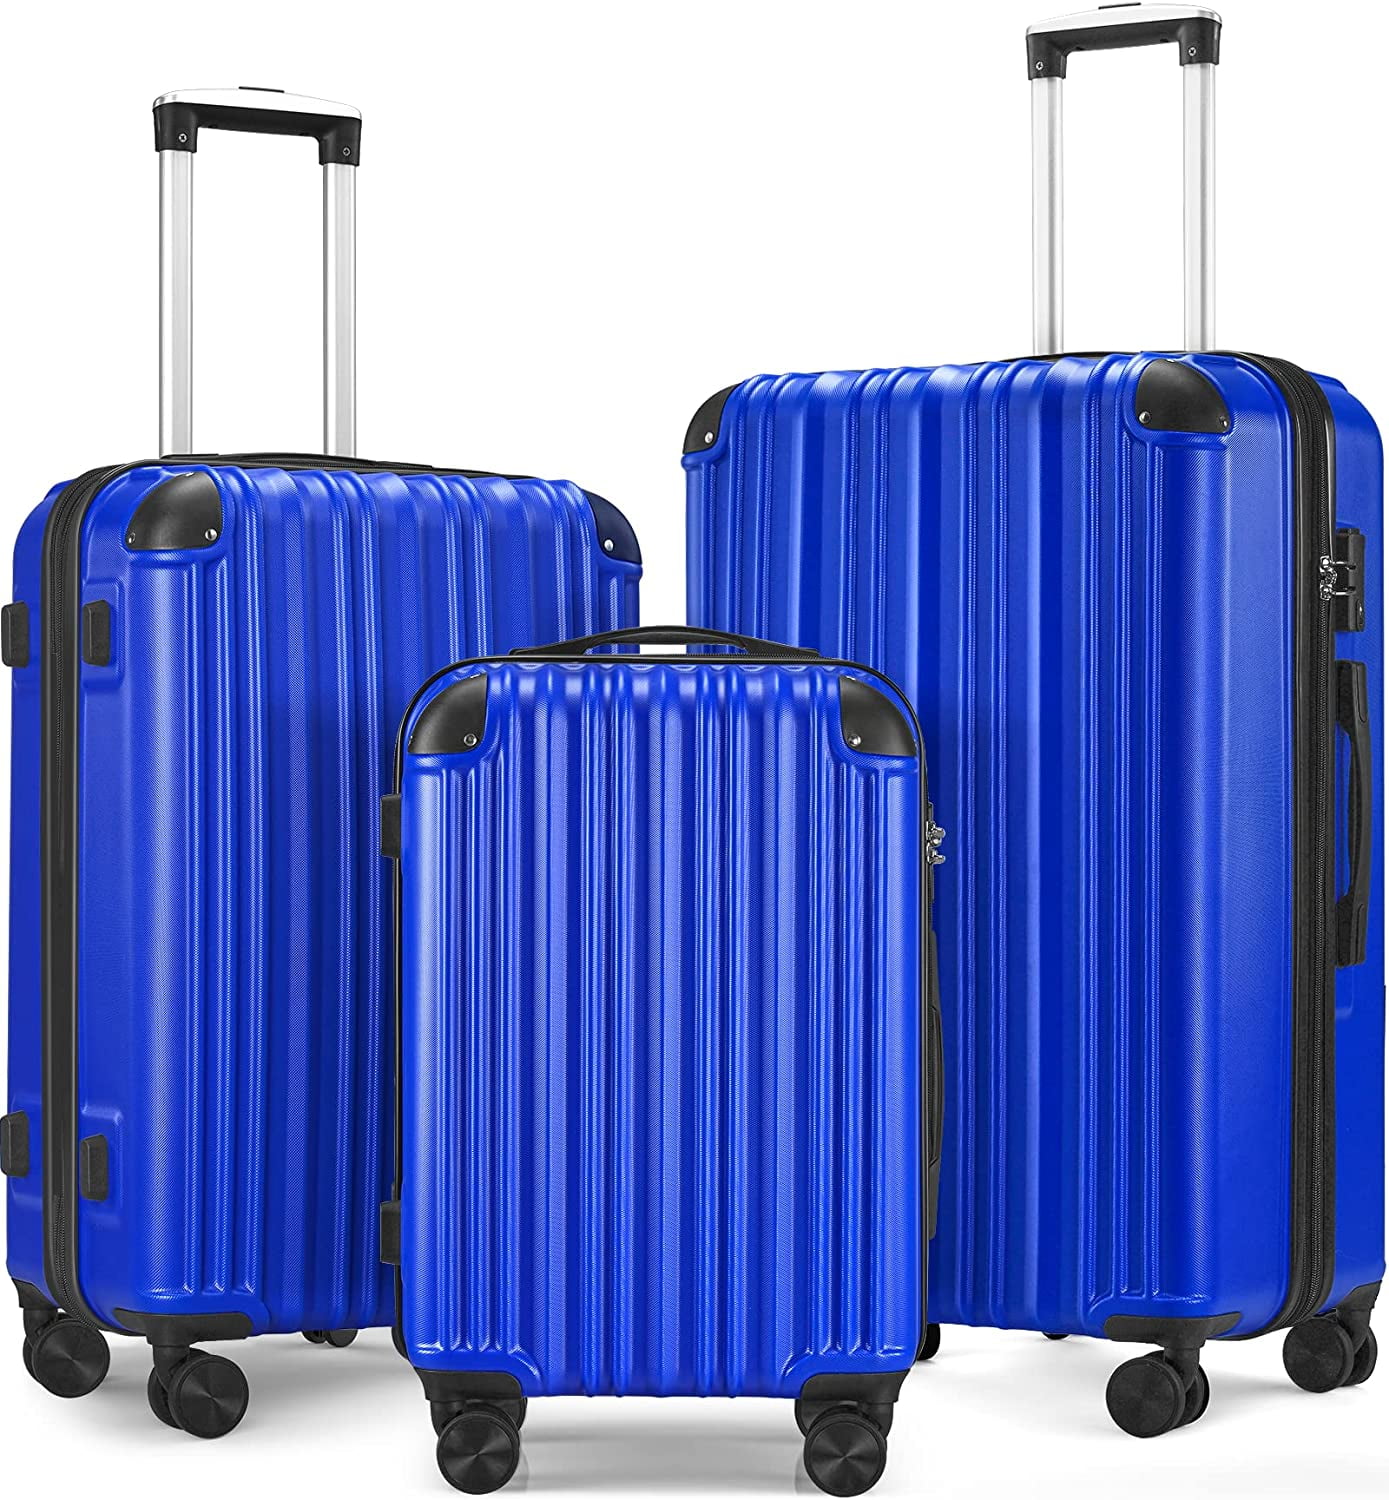 (New Version) Piece Luggage Sets Hard Shell Suitcase Set with Spinner  Wheels for Travel, Blue